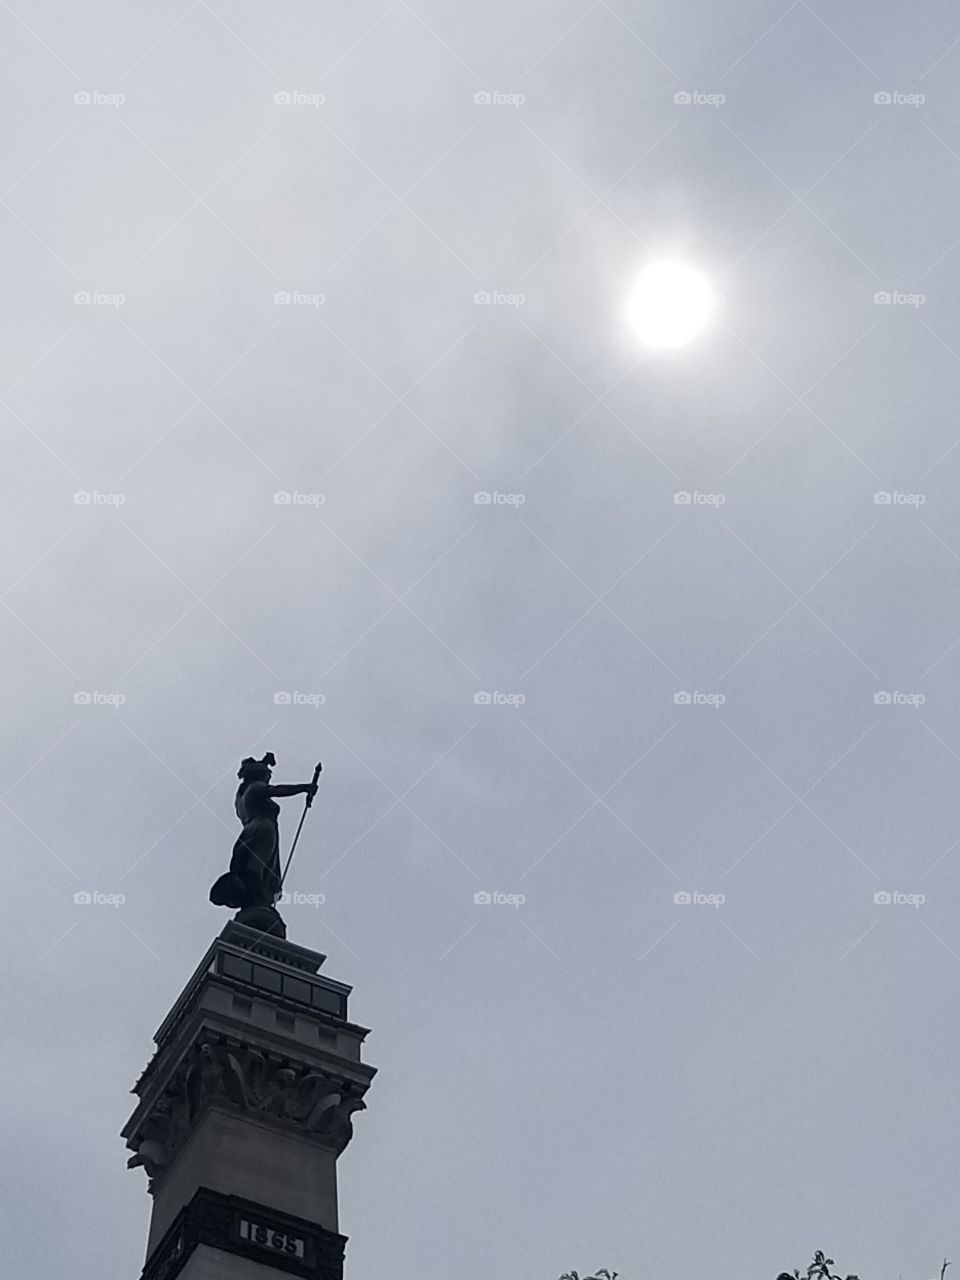 Beauty of the sun light hidden within the clouds high above the monument!!